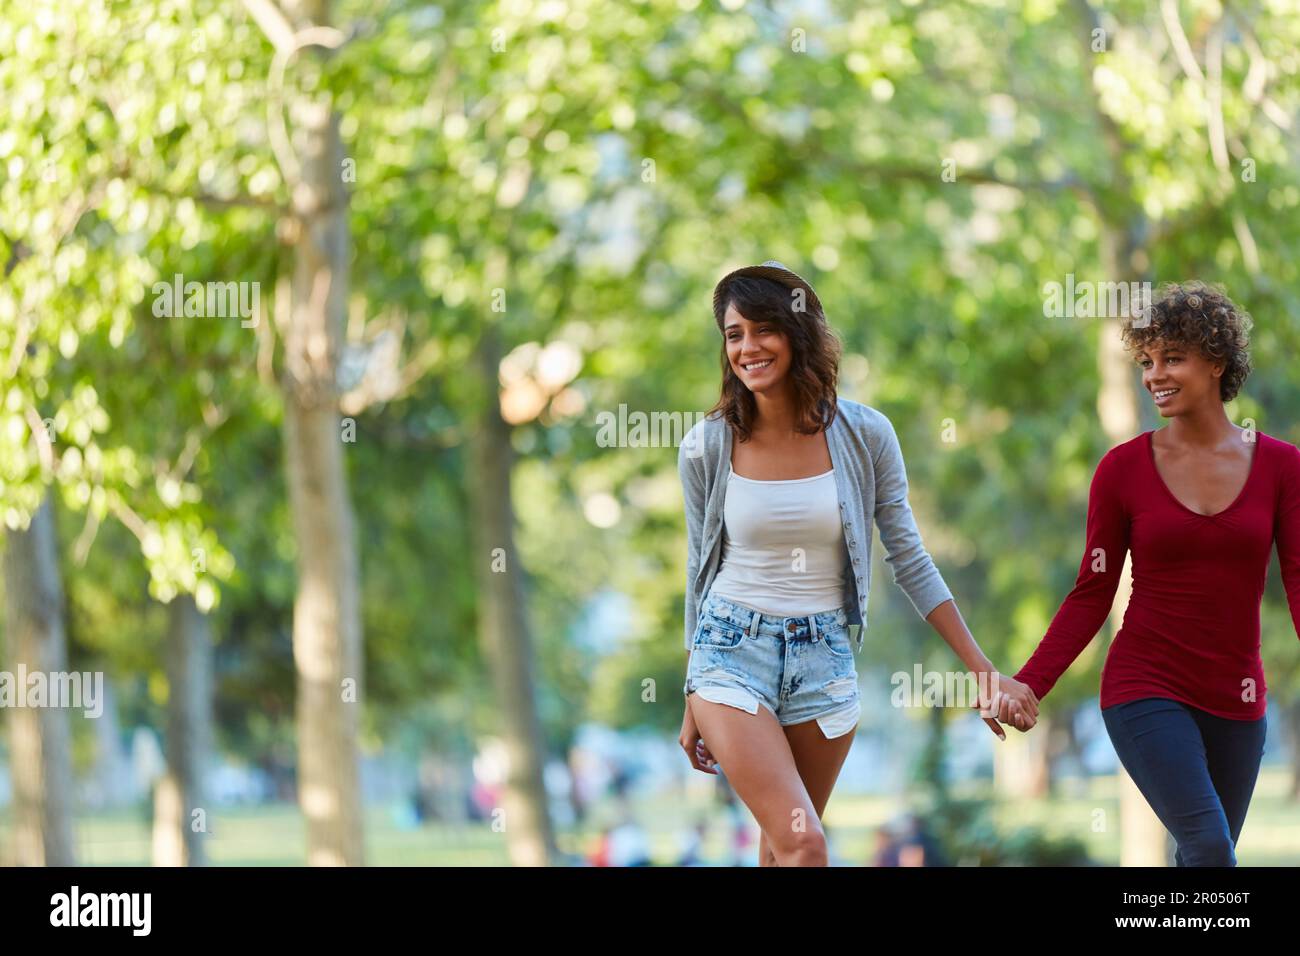 Strolling and living life one step at a time. a young couple spending the day outdoors on a sunny day. Stock Photo